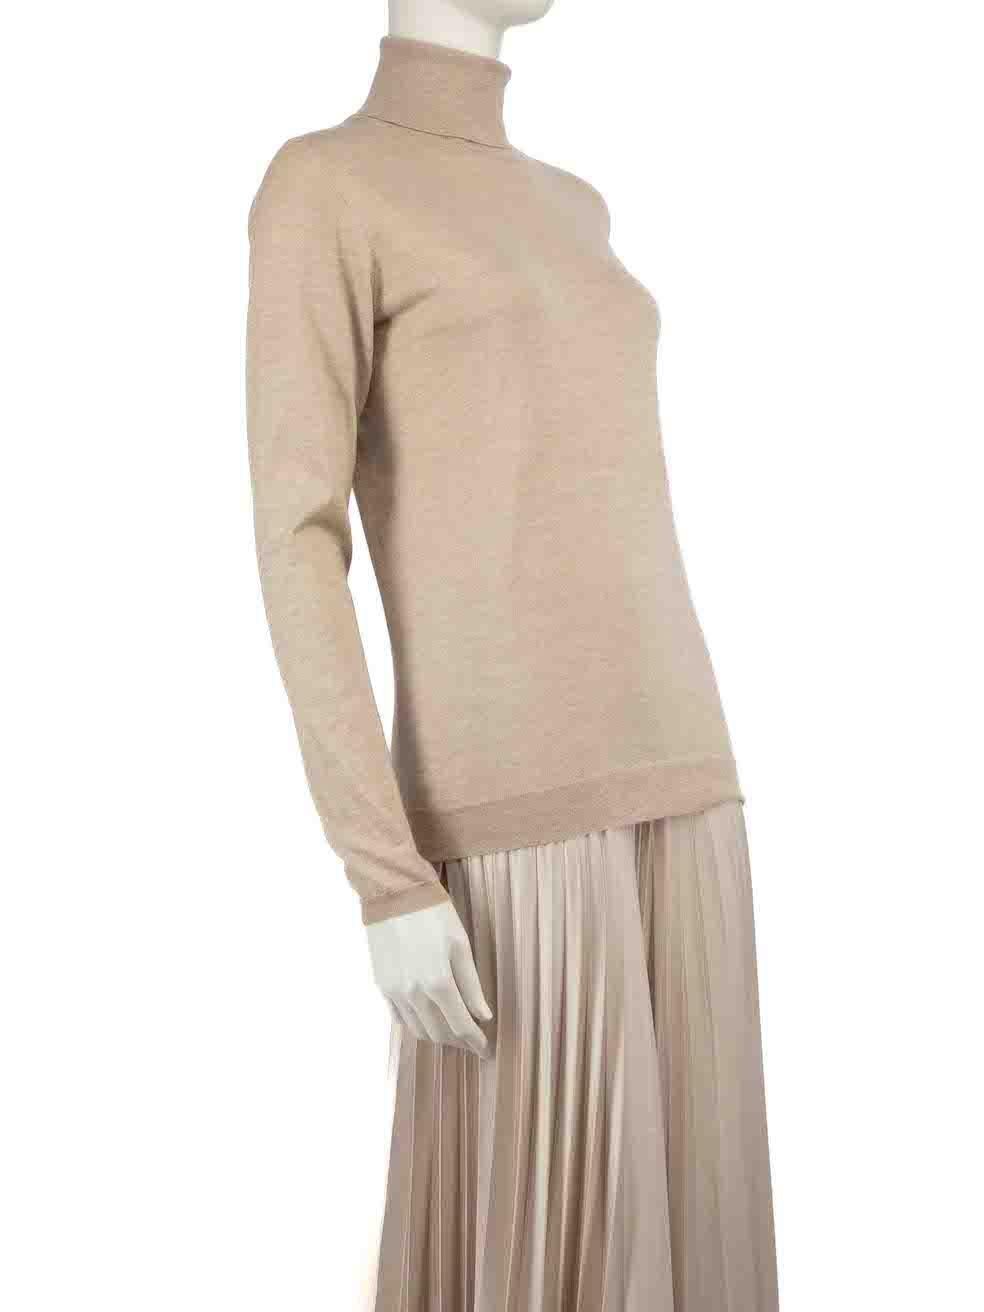 CONDITION is Never worn. No visible wear to turtleneck is evident on this new Brunello Cucinelli designer resale item.
 
 
 
 Details
 
 
 Beige
 
 Cashmere
 
 Knit jumper
 
 Turtleneck top
 
 Long sleeves
 
 Metallic thread
 
 Stretchy
 
 
 
 
 
